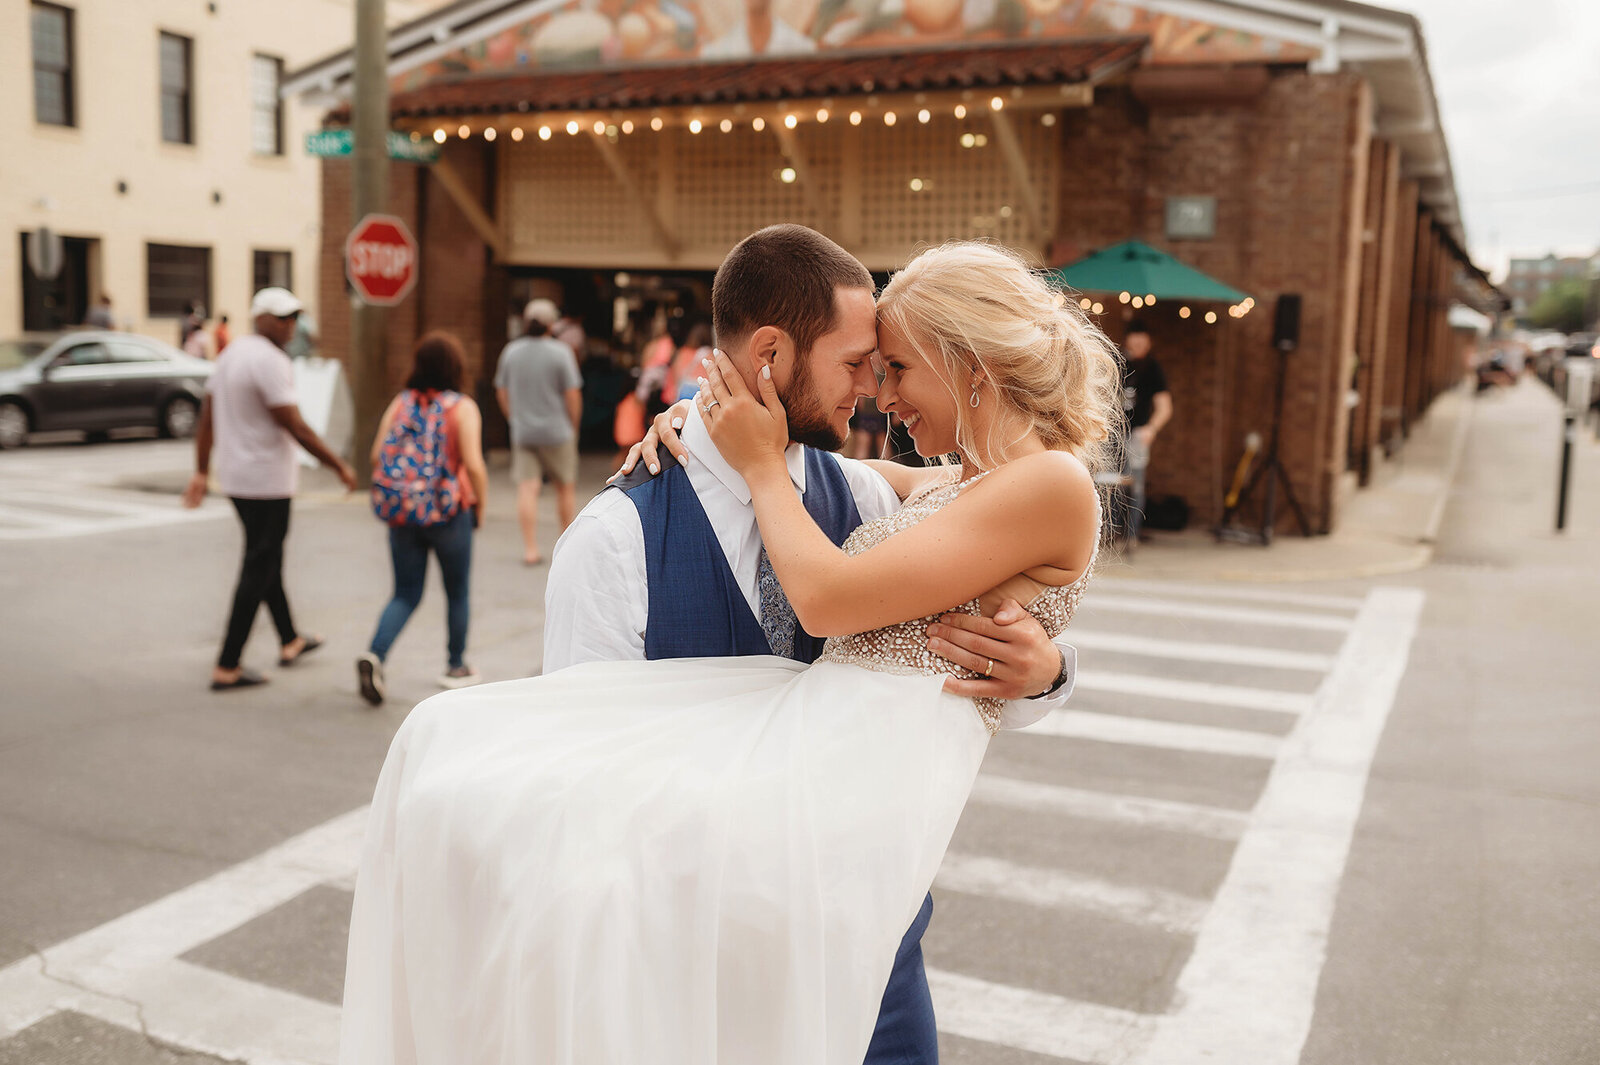 Bride and Groom dance in the street in front of the city market after their Micro-Wedding Ceremony in Charleston, SC.